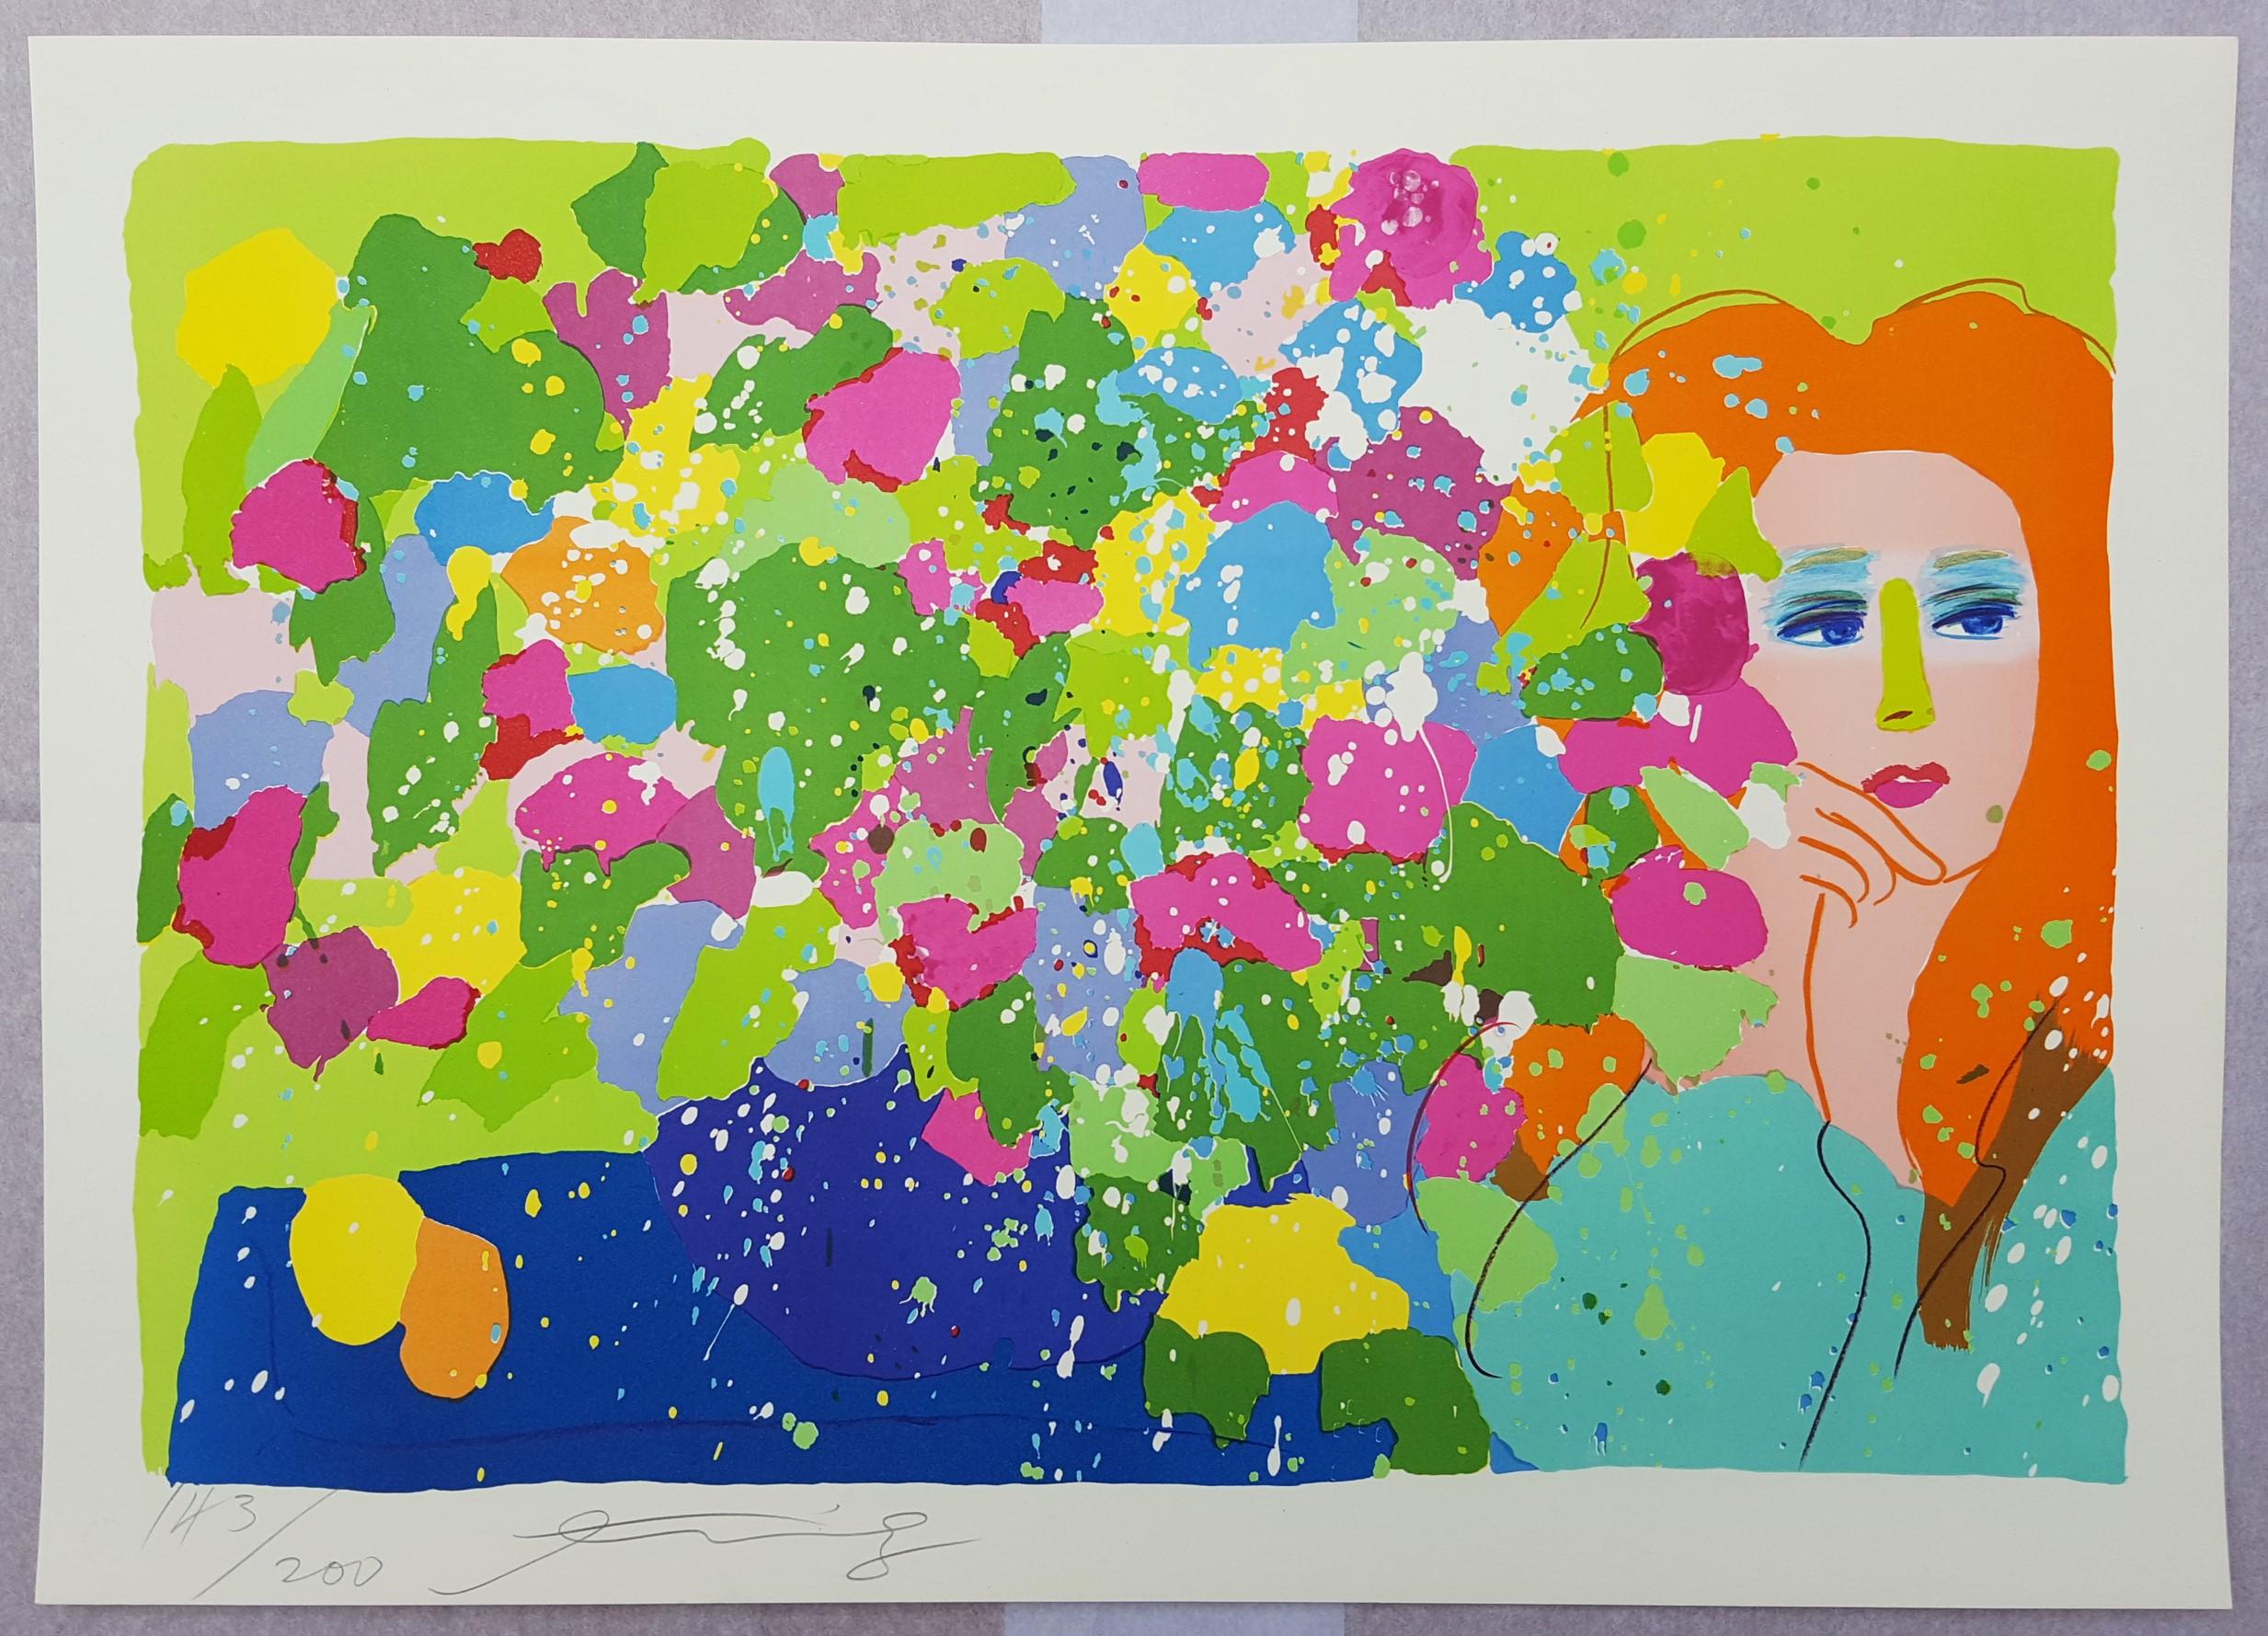 Lady with Flowers /// Pop Art Walasse Ting Buntes Mädchen Abstrakte Lithographie Kunst im Angebot 2